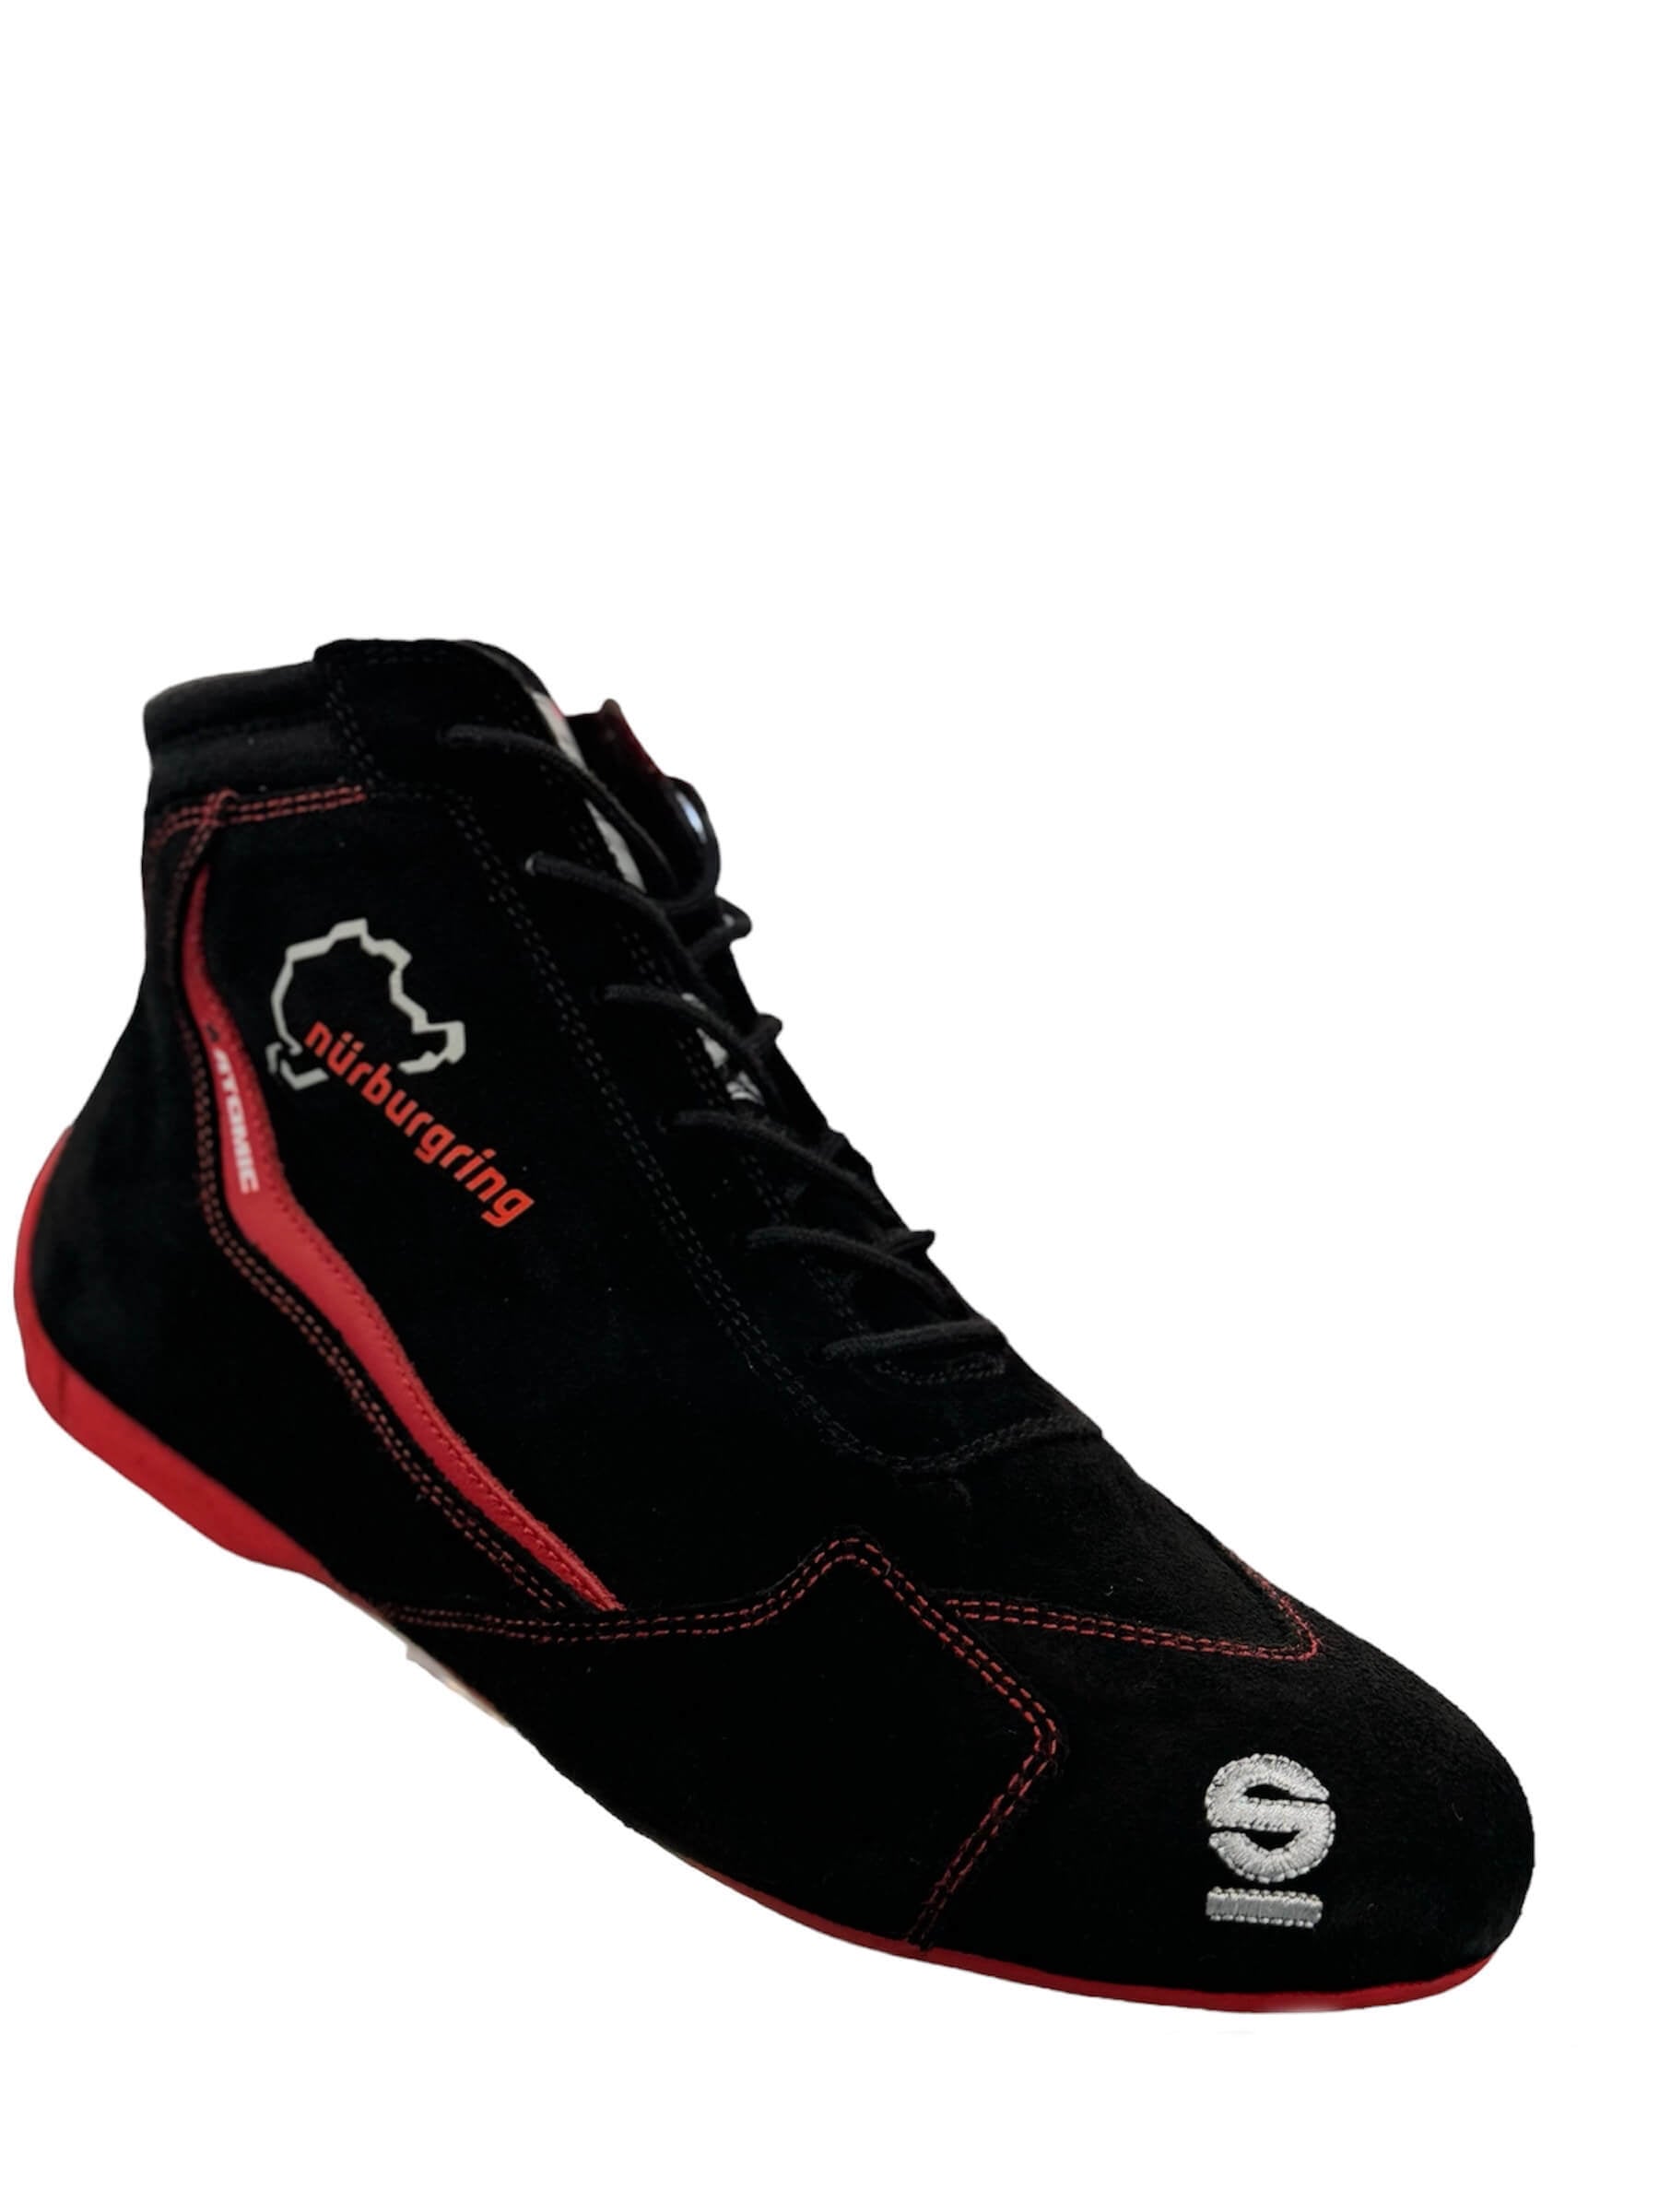 SPARCO 001295SP_NBR44 Shoes Slalom Nurburgring Edition black/red Size 44 Photo-0 